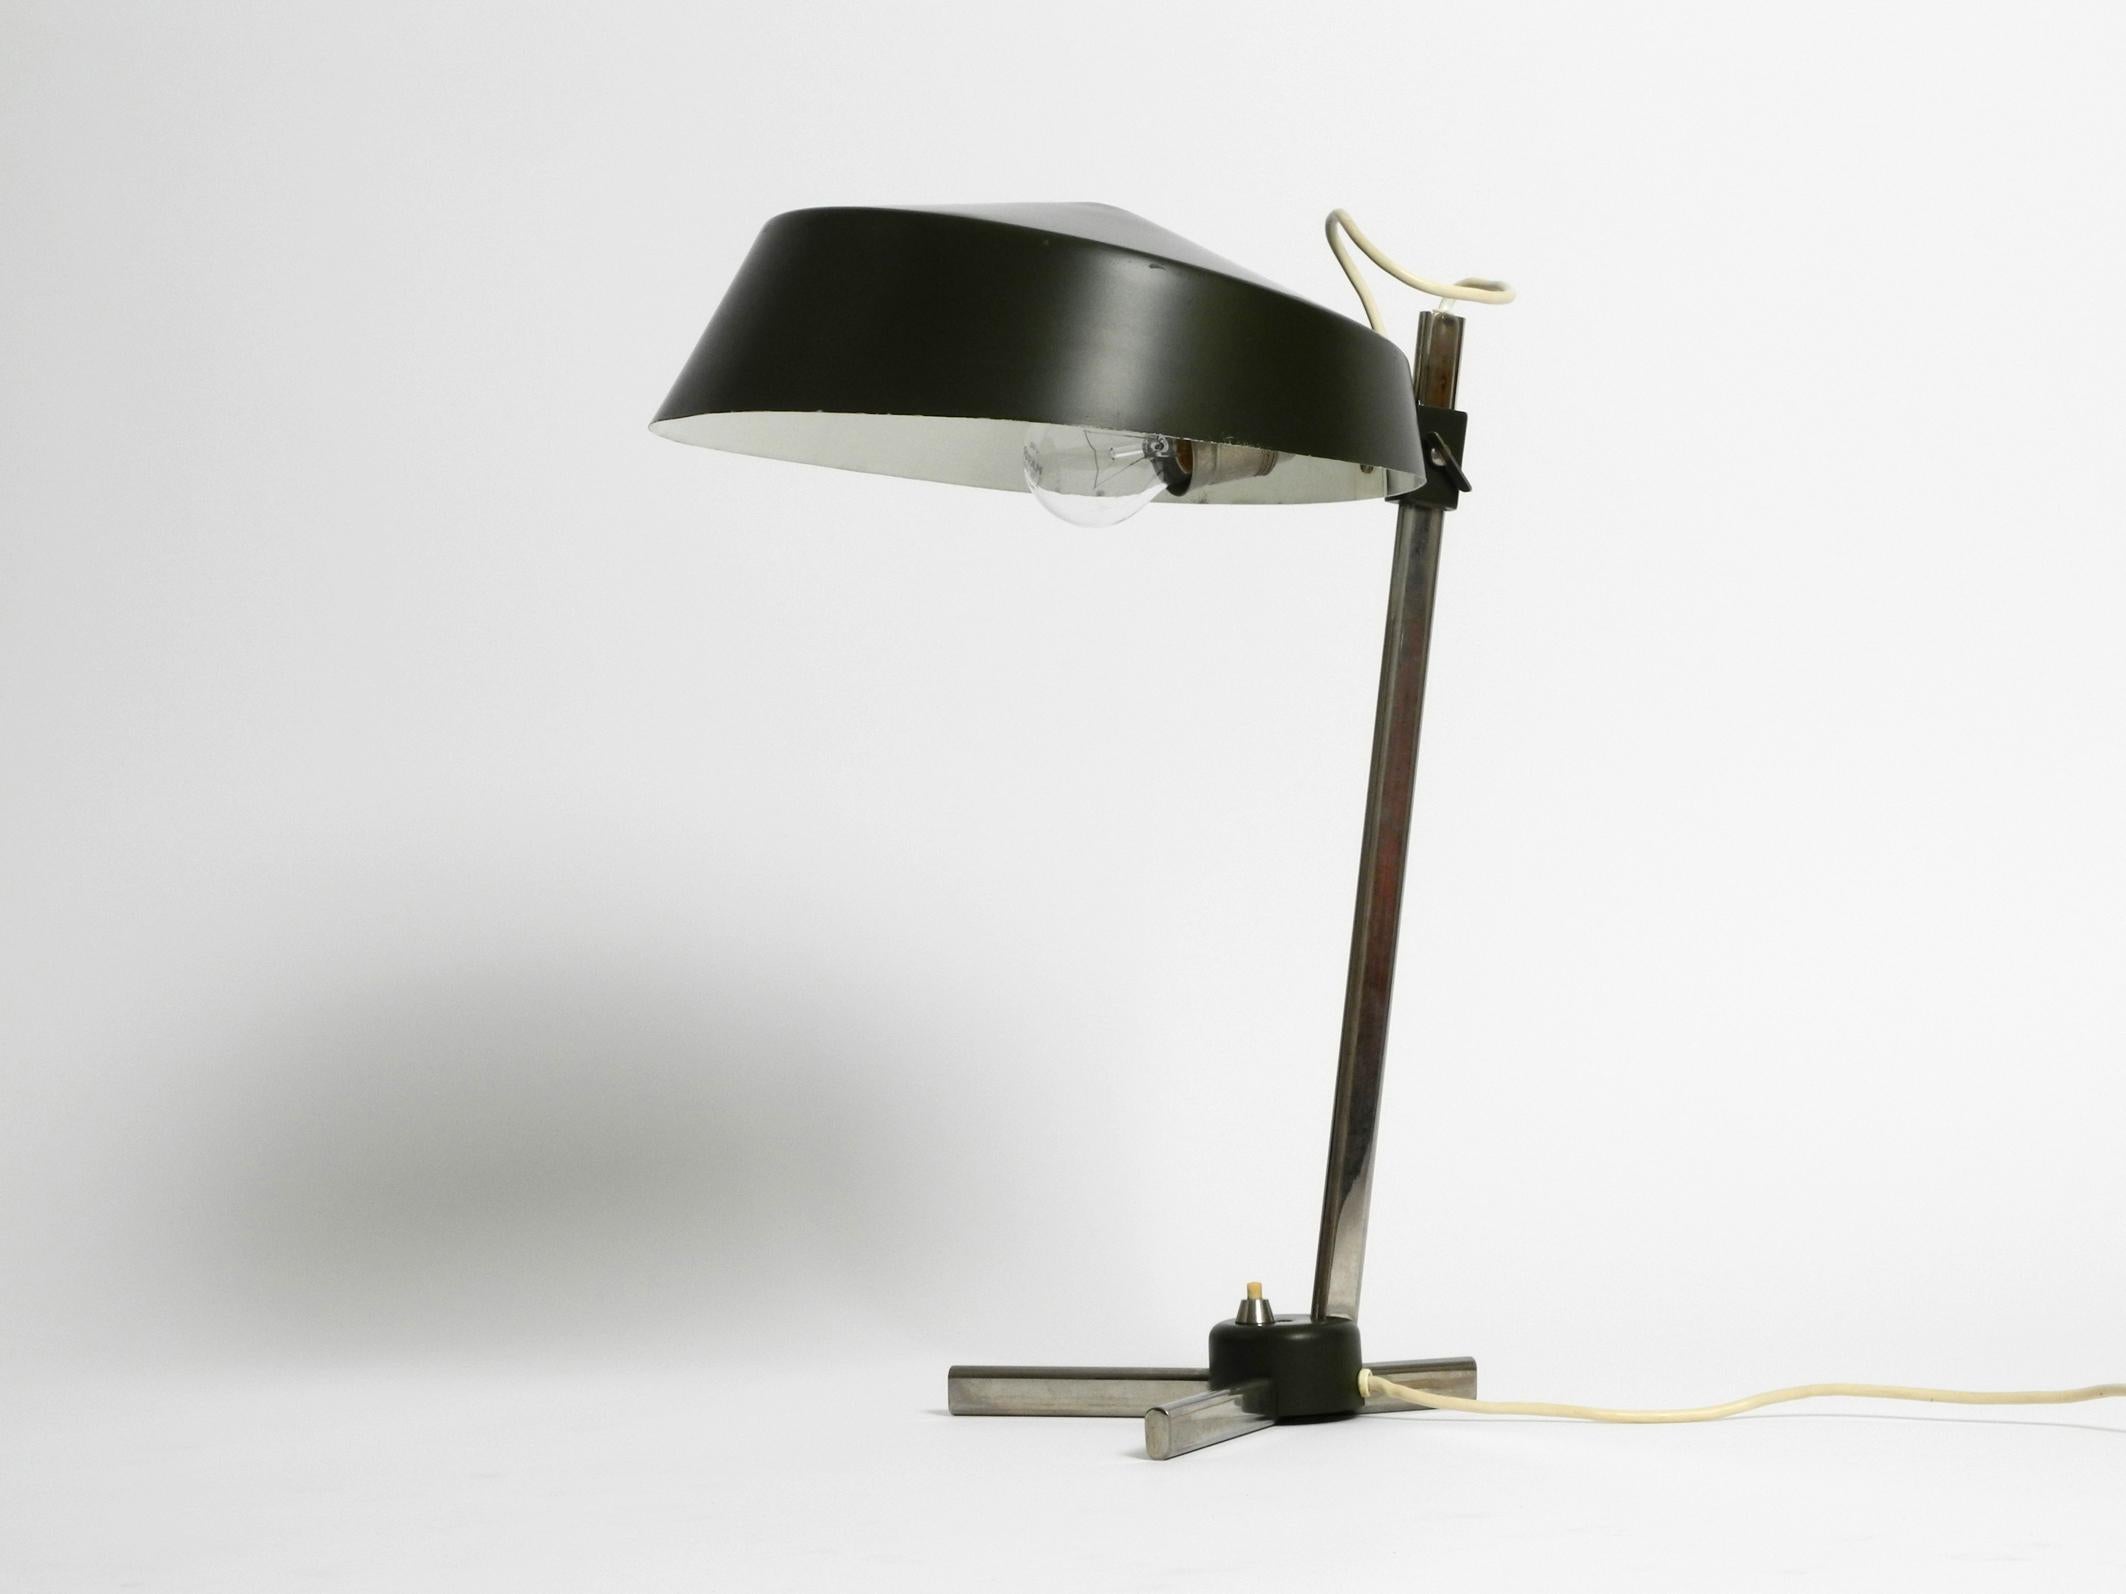 High quality 1960s Industrial table lamp with height-adjustable shade. 
Great rare Industrial Design. Made in Germany.
The shade is steplessly adjustable in height and holds firmly in any position.
Shade and foot are covered with the original